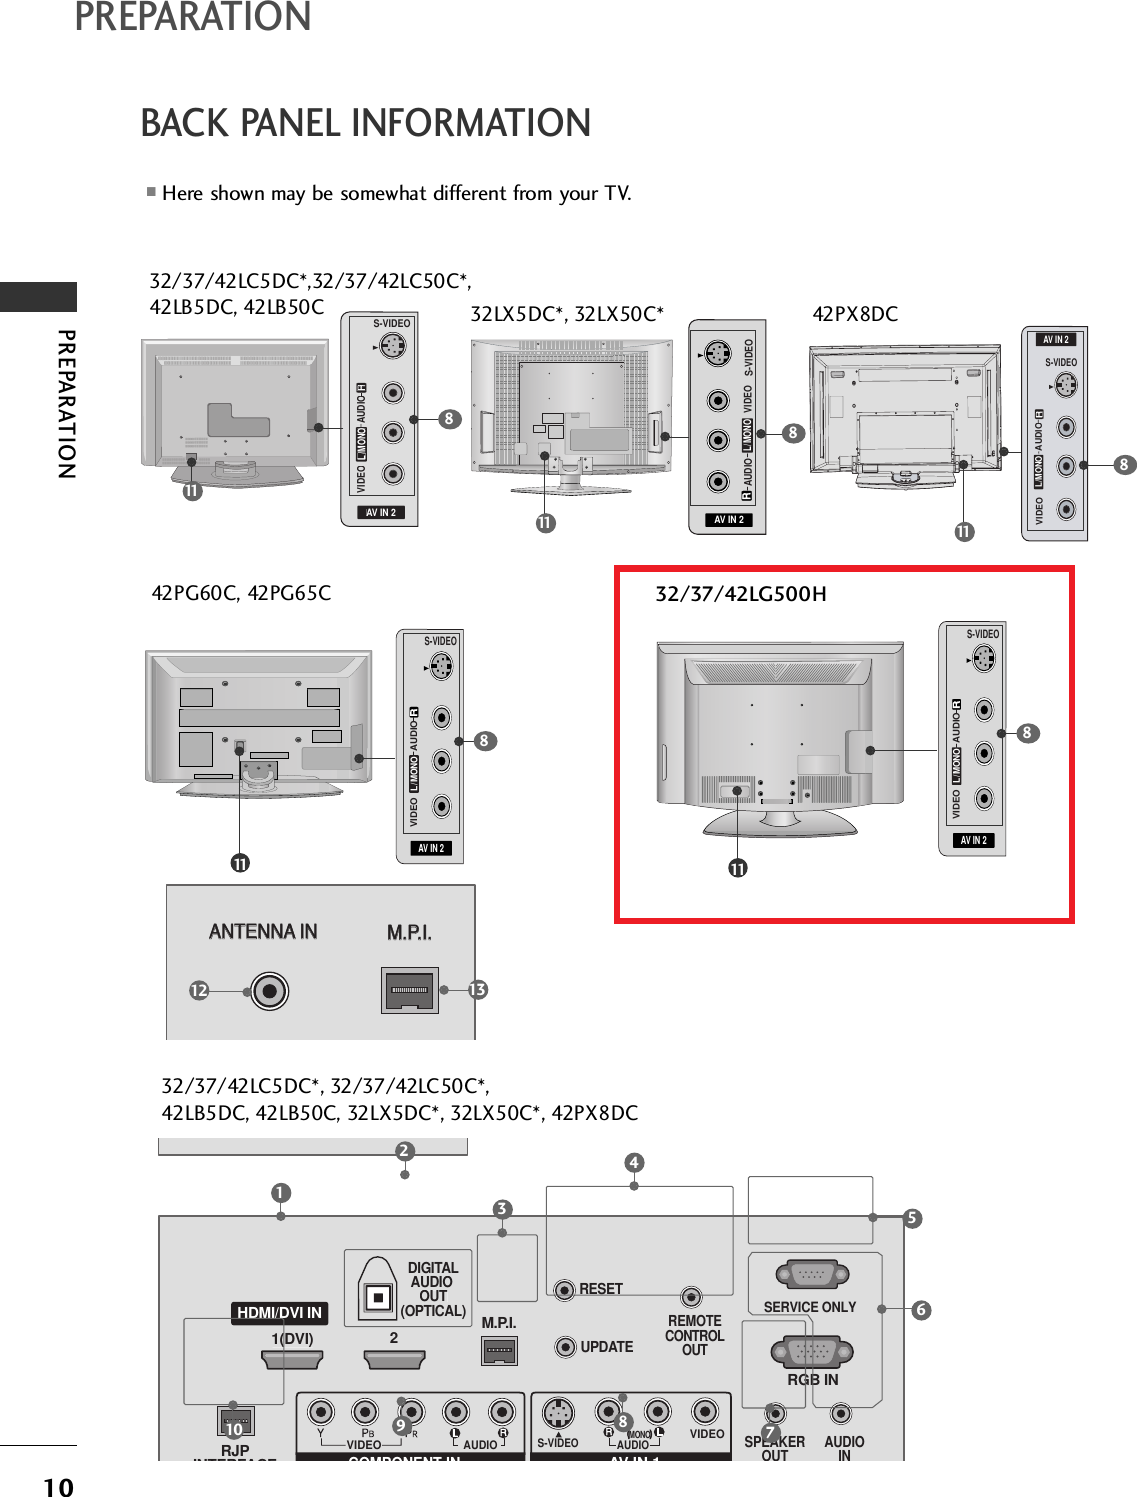 PREPARATION10PREPARATIONBACK PANEL INFORMATION■Here shown may be somewhat different from your TV.(            )ANTENNA IN M.P.I.1132/37/42LC5DC*,32/37/42LC50C*,  42LB5DC, 42LB50C 32LX5DC*, 32LX50C*RAV IN 2VIDEOS-VIDEOL/MONORAUDIO42PX8DC11 11AV IN 2L/MONORAUDIOAOVIDEOS-VIDEO42PG60C, 42PG65C(            )R(            )AV IN 2L/MONORAUDIOVIDEOS-VIDEO11888VIDEOAUDIOVIDEOAUDIOMONO(                        )S-VIDEOREMOTECONTROLOUTRGB INAUDIOINRESETUPDATEM.P.I.1(DVI)RJPINTERFACE2SERVICE ONLYHDMI/DVI INSPEAKEROUTAV IN 1COMPONENT INDIGITALAUDIOOUT(OPTICAL)ANTENNA IN M.P.I.61523478910AV IN 2L/MONORAUDIOOVIDEOS-VIDEO(            )ANTENNA IN M.P.I.8R(            )1132/37/42LG500H 32/37/42LC5DC*, 32/37/42LC50C*,  42LB5DC, 42LB50C, 32LX5DC*, 32LX50C*, 42PX8DC(            )ANTENNA INANTENNA IN M.P.I.M.P.I.12 13(            )AV IN 2L/MONORAUDIOVIDEOS-VIDEO8